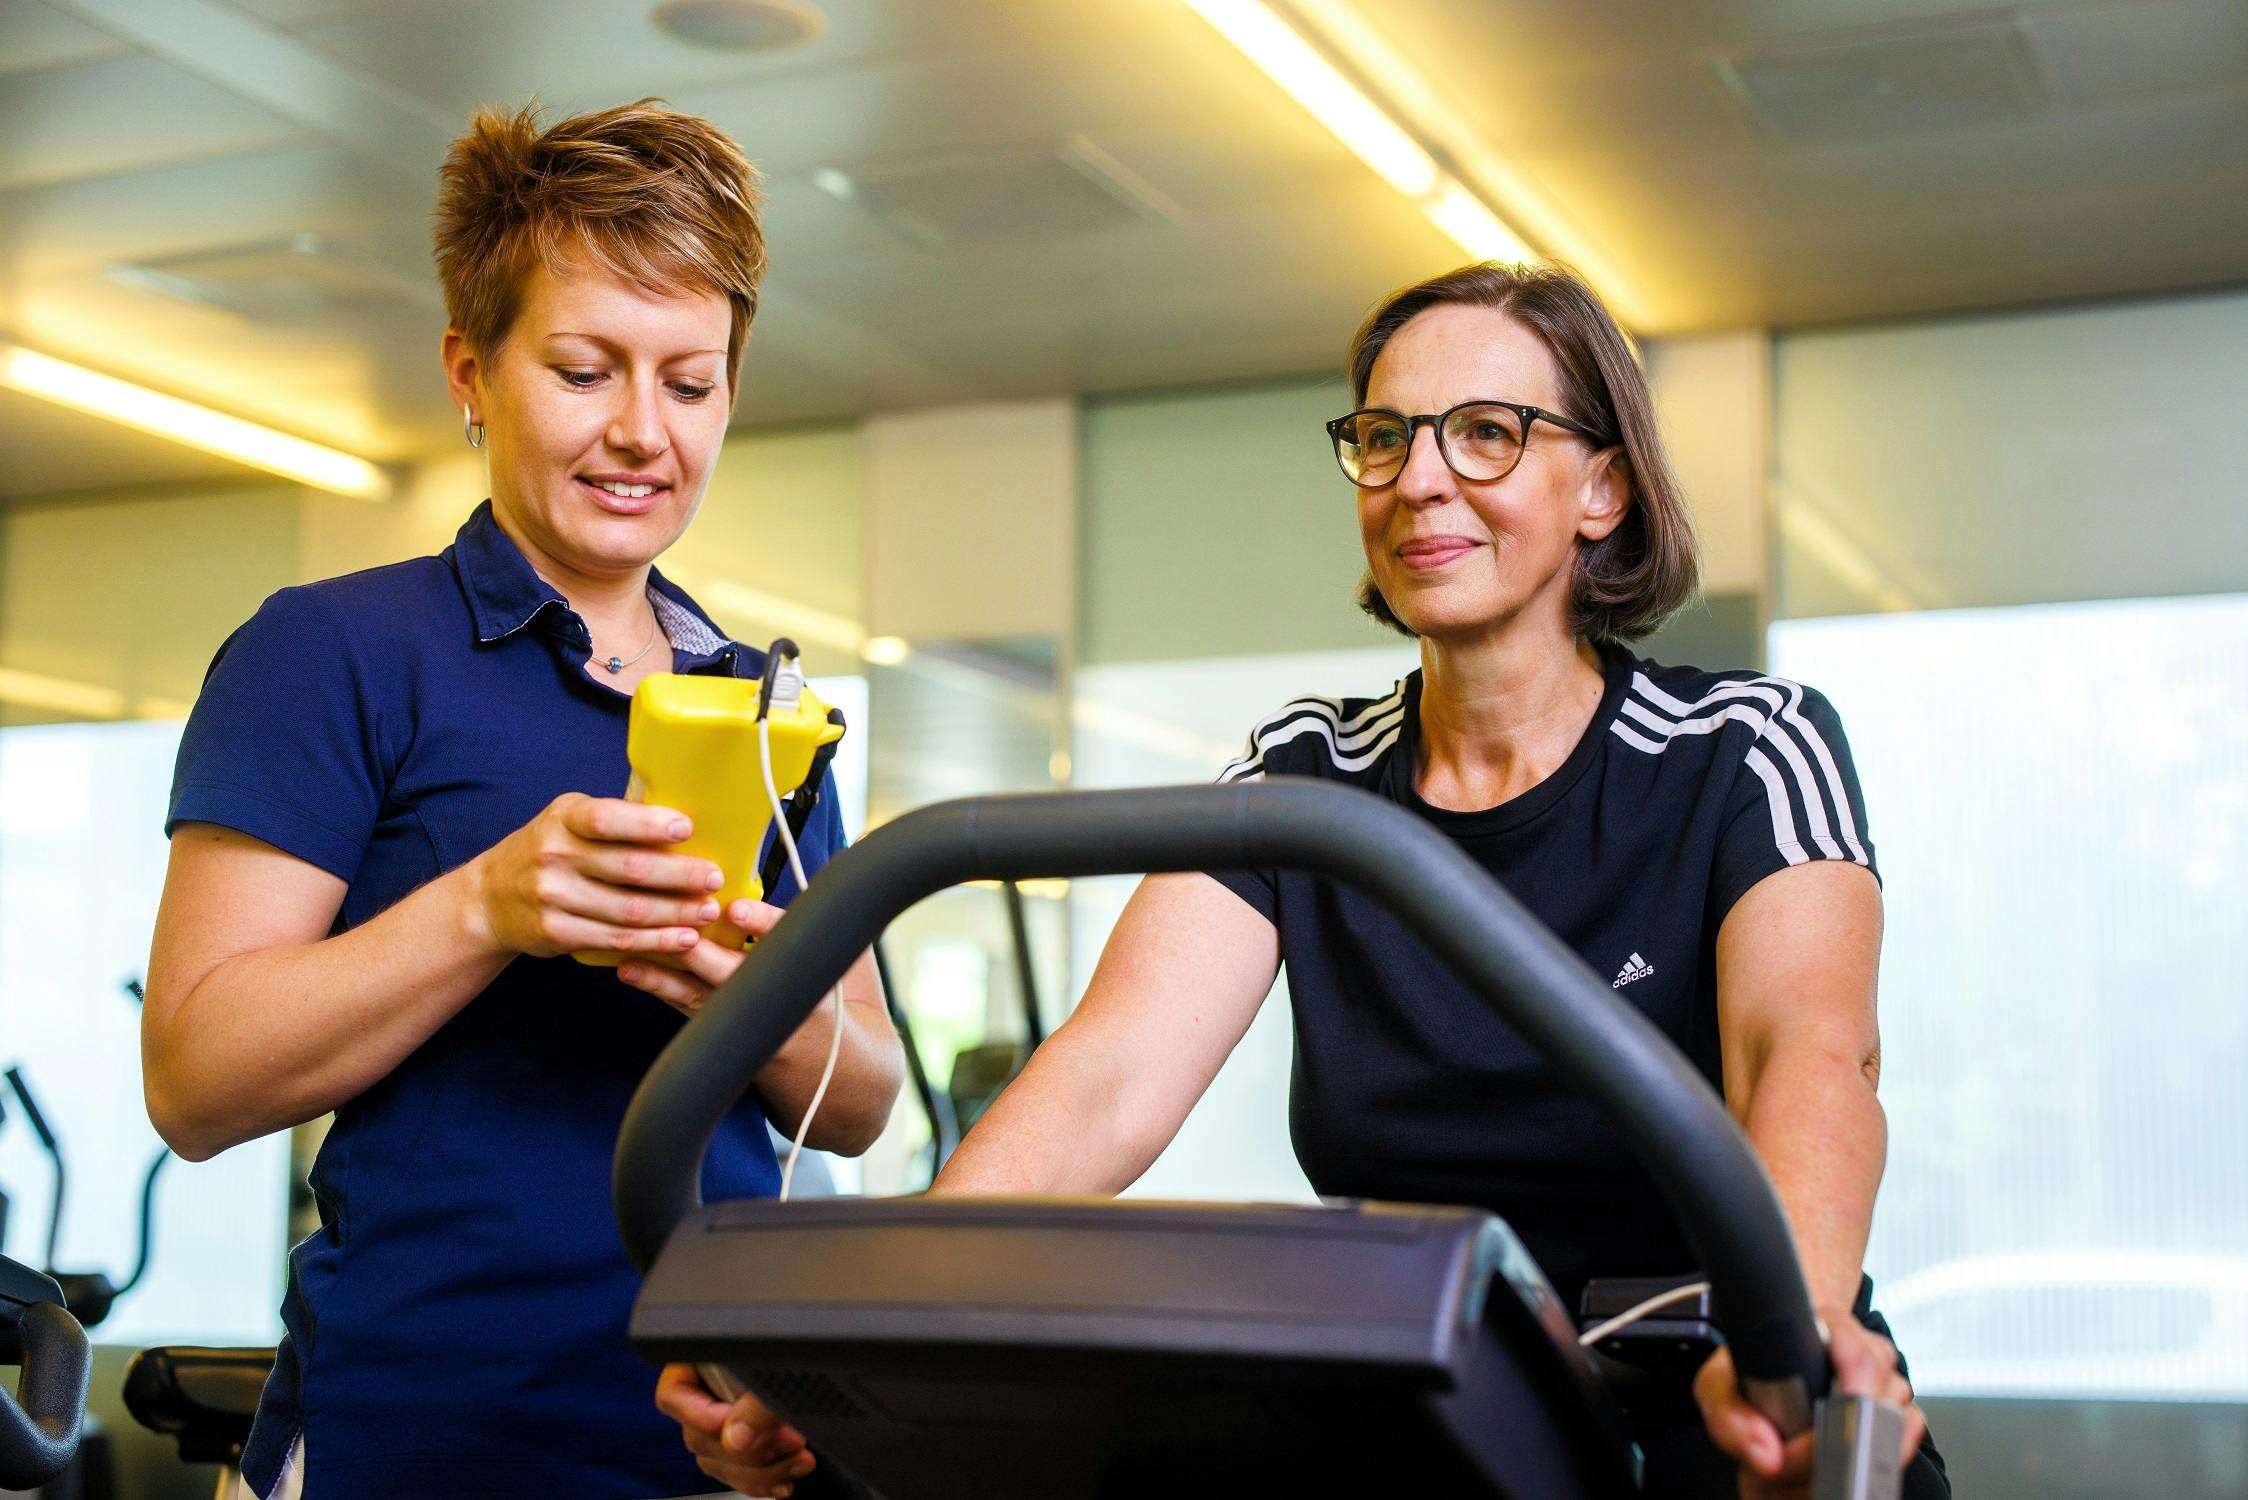 Two women in the gym, one training on the treadmill and the other with a smartphone.